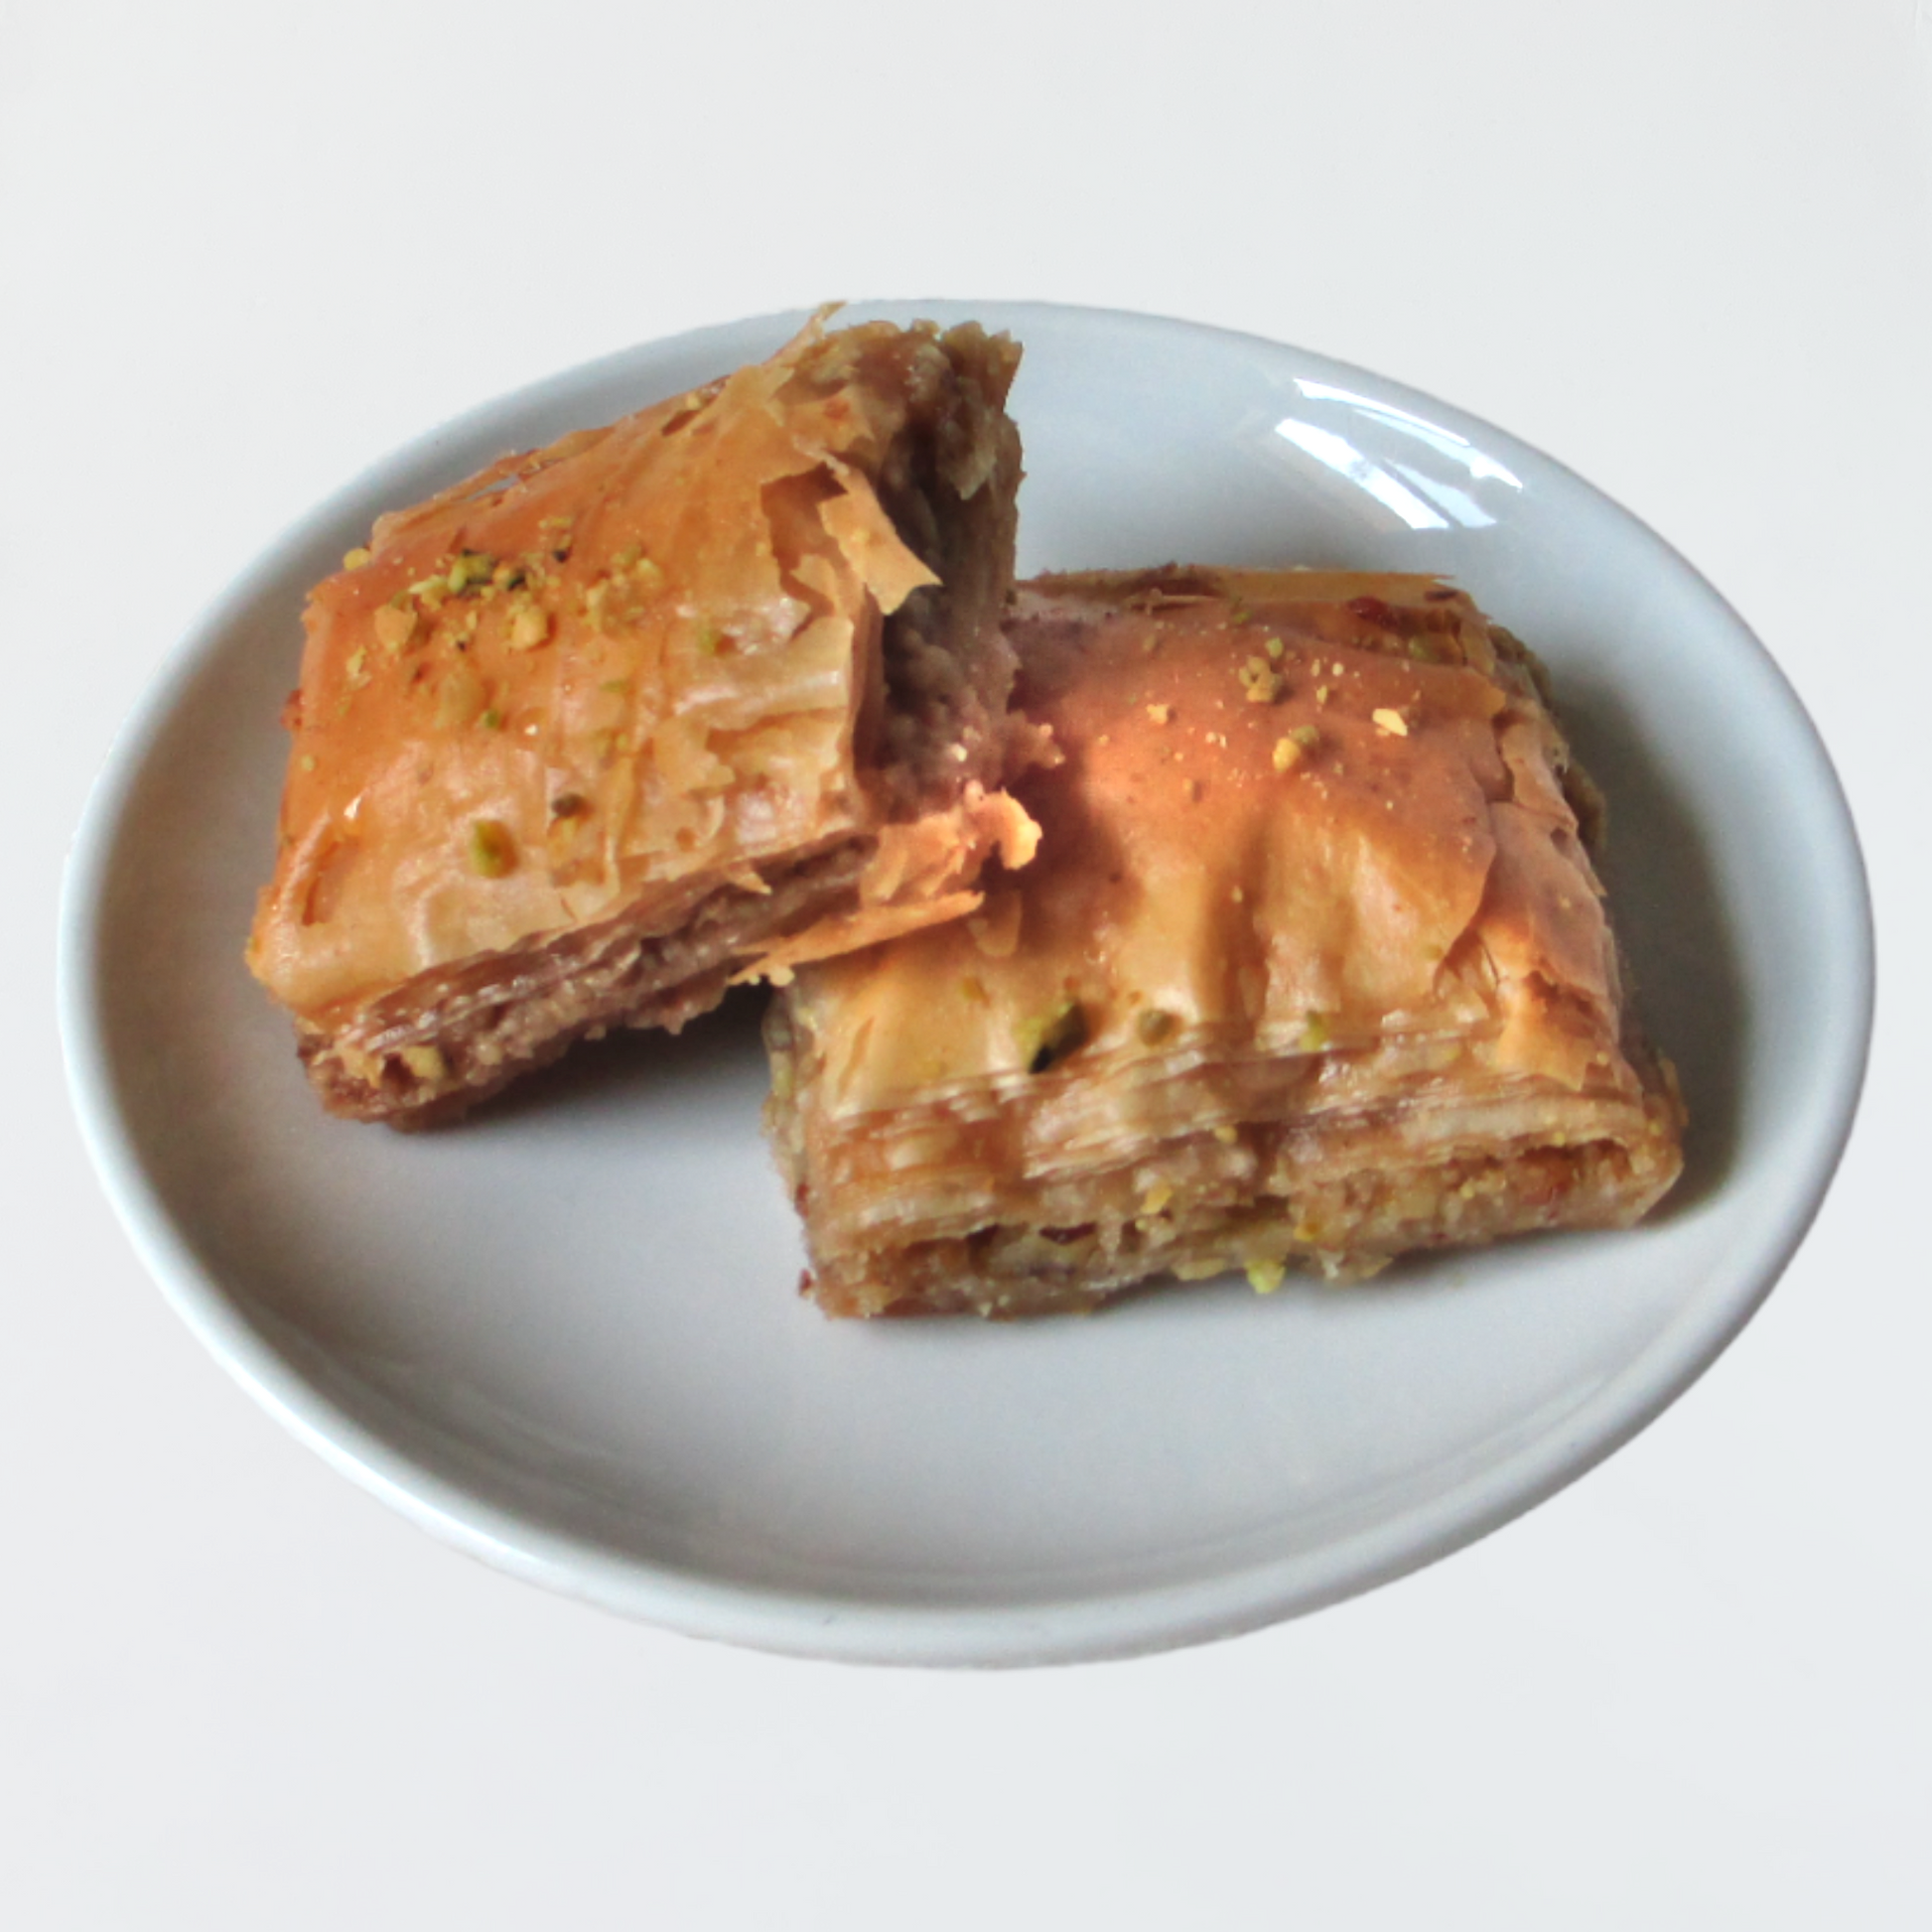 Homemade, authentic baklava!  IG:@nannies.sweets_andmore